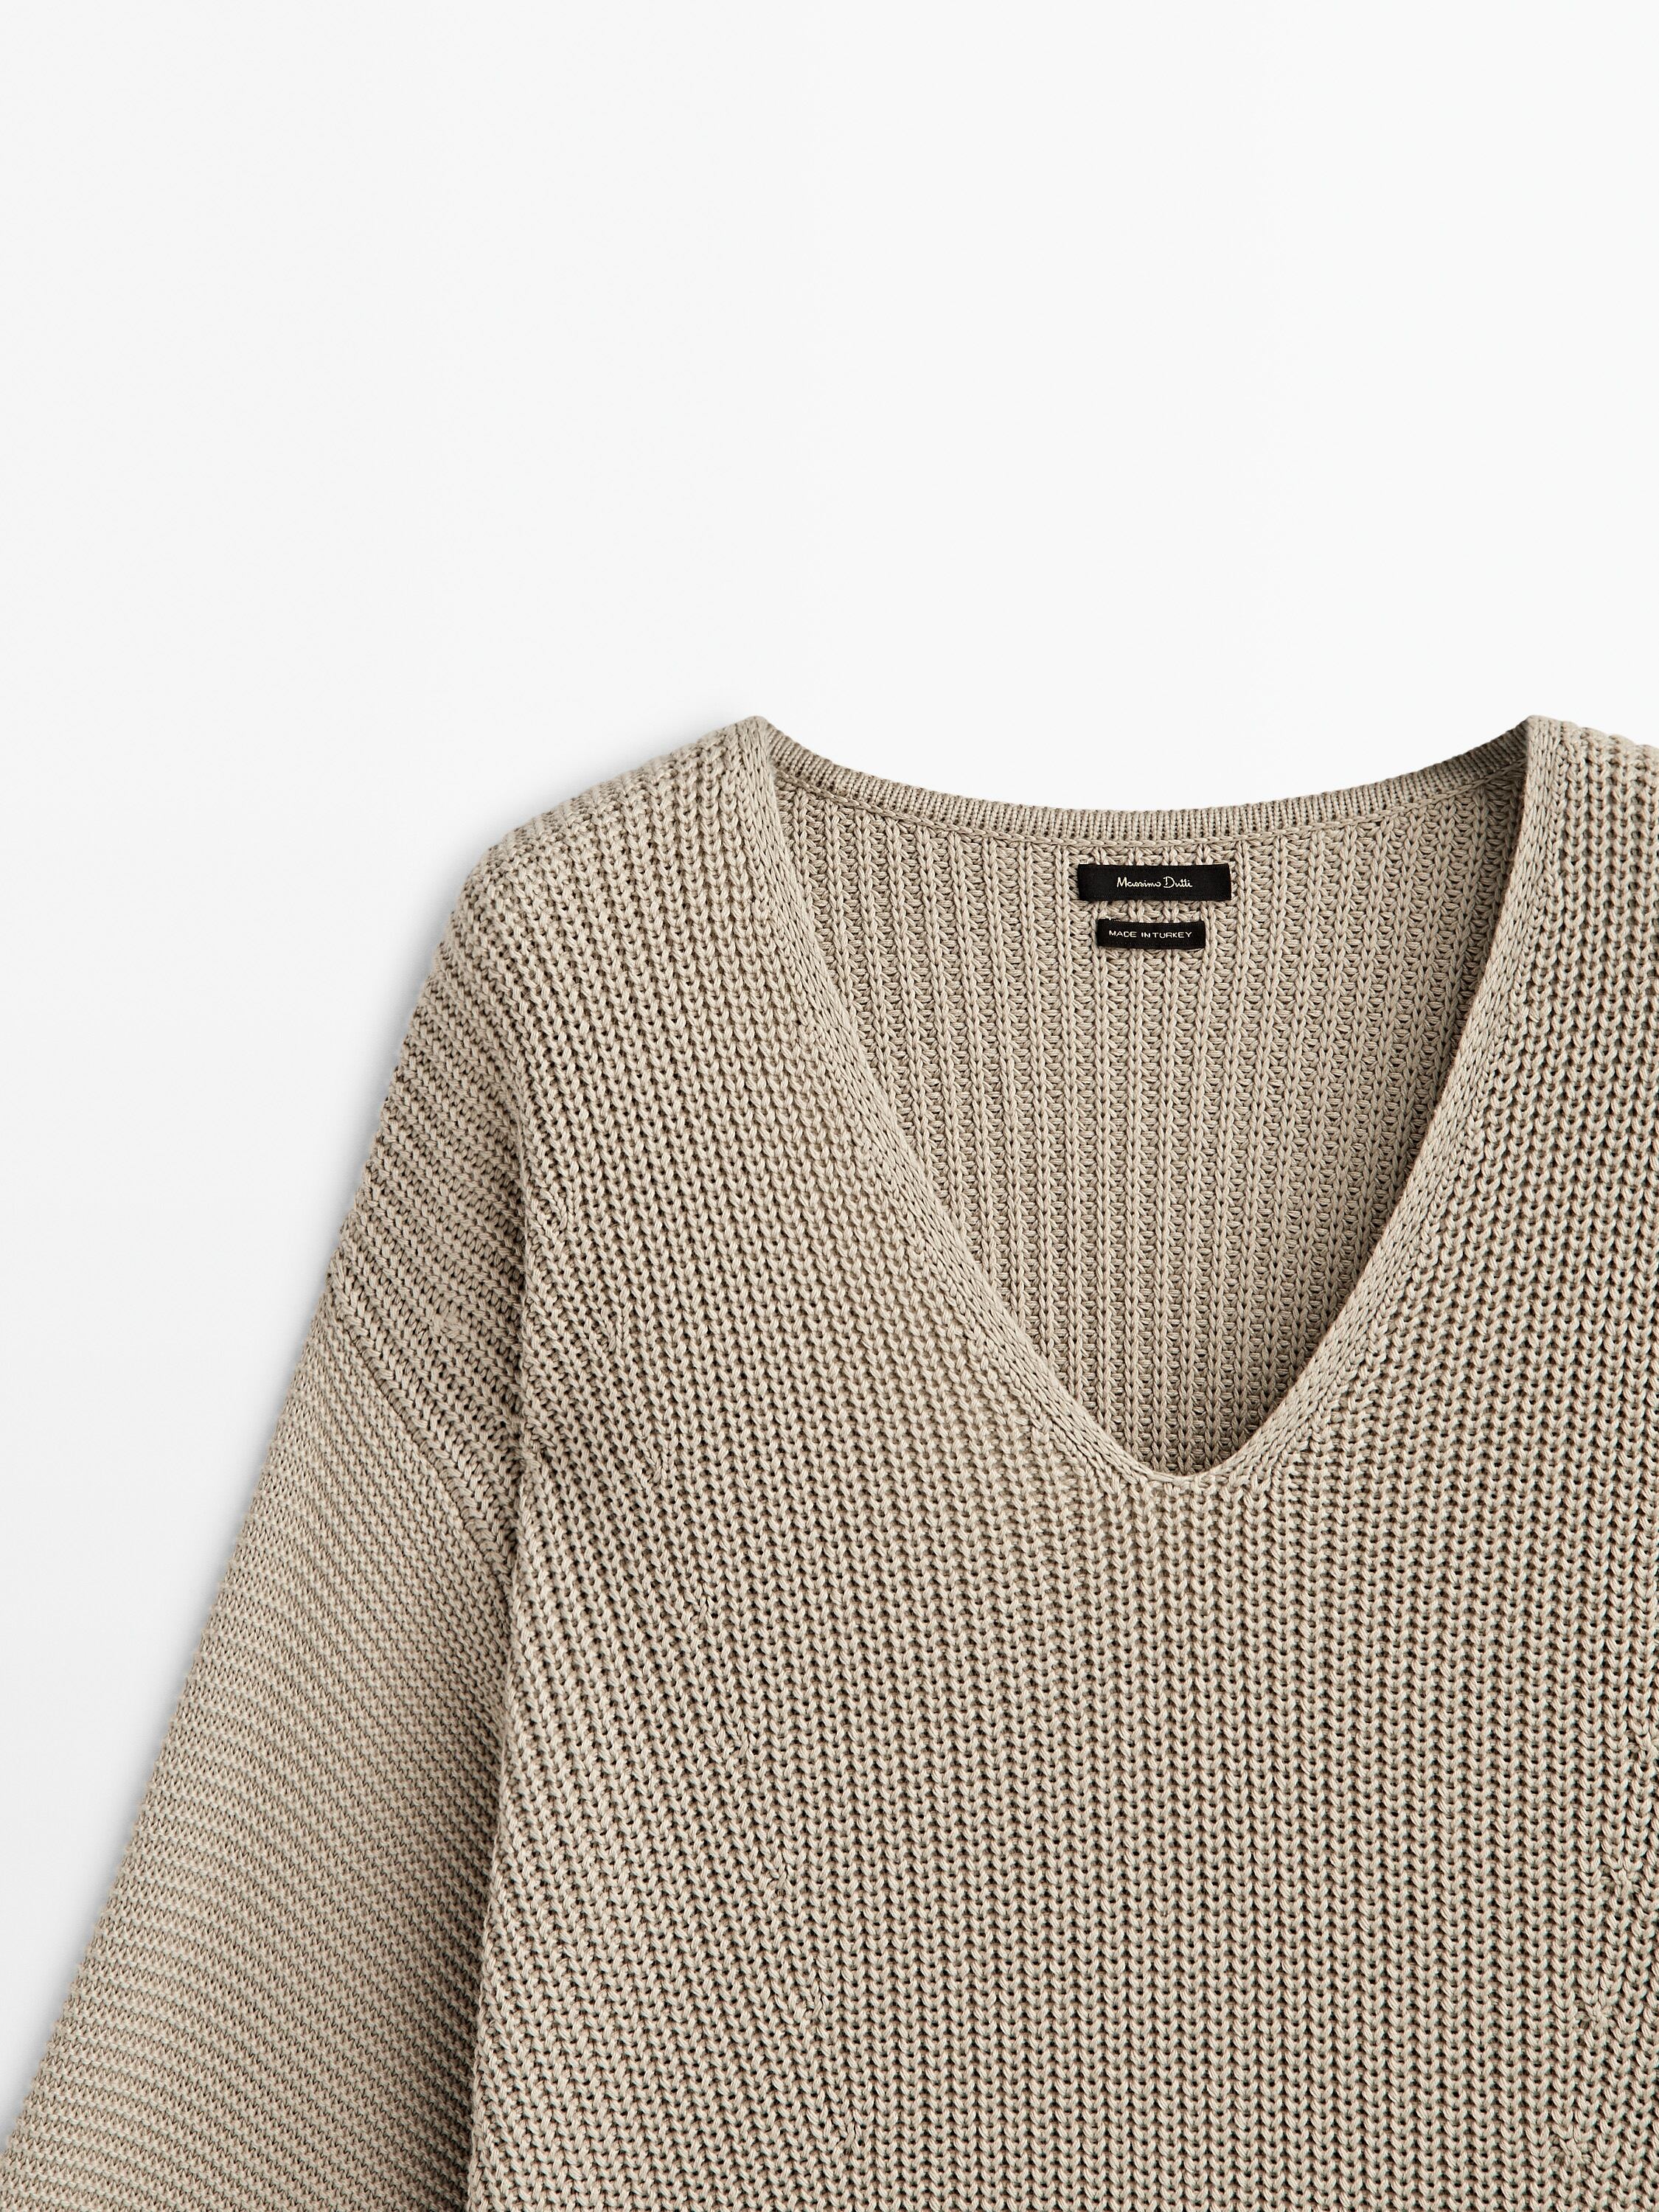 Purl knit sweater with sleeve detail